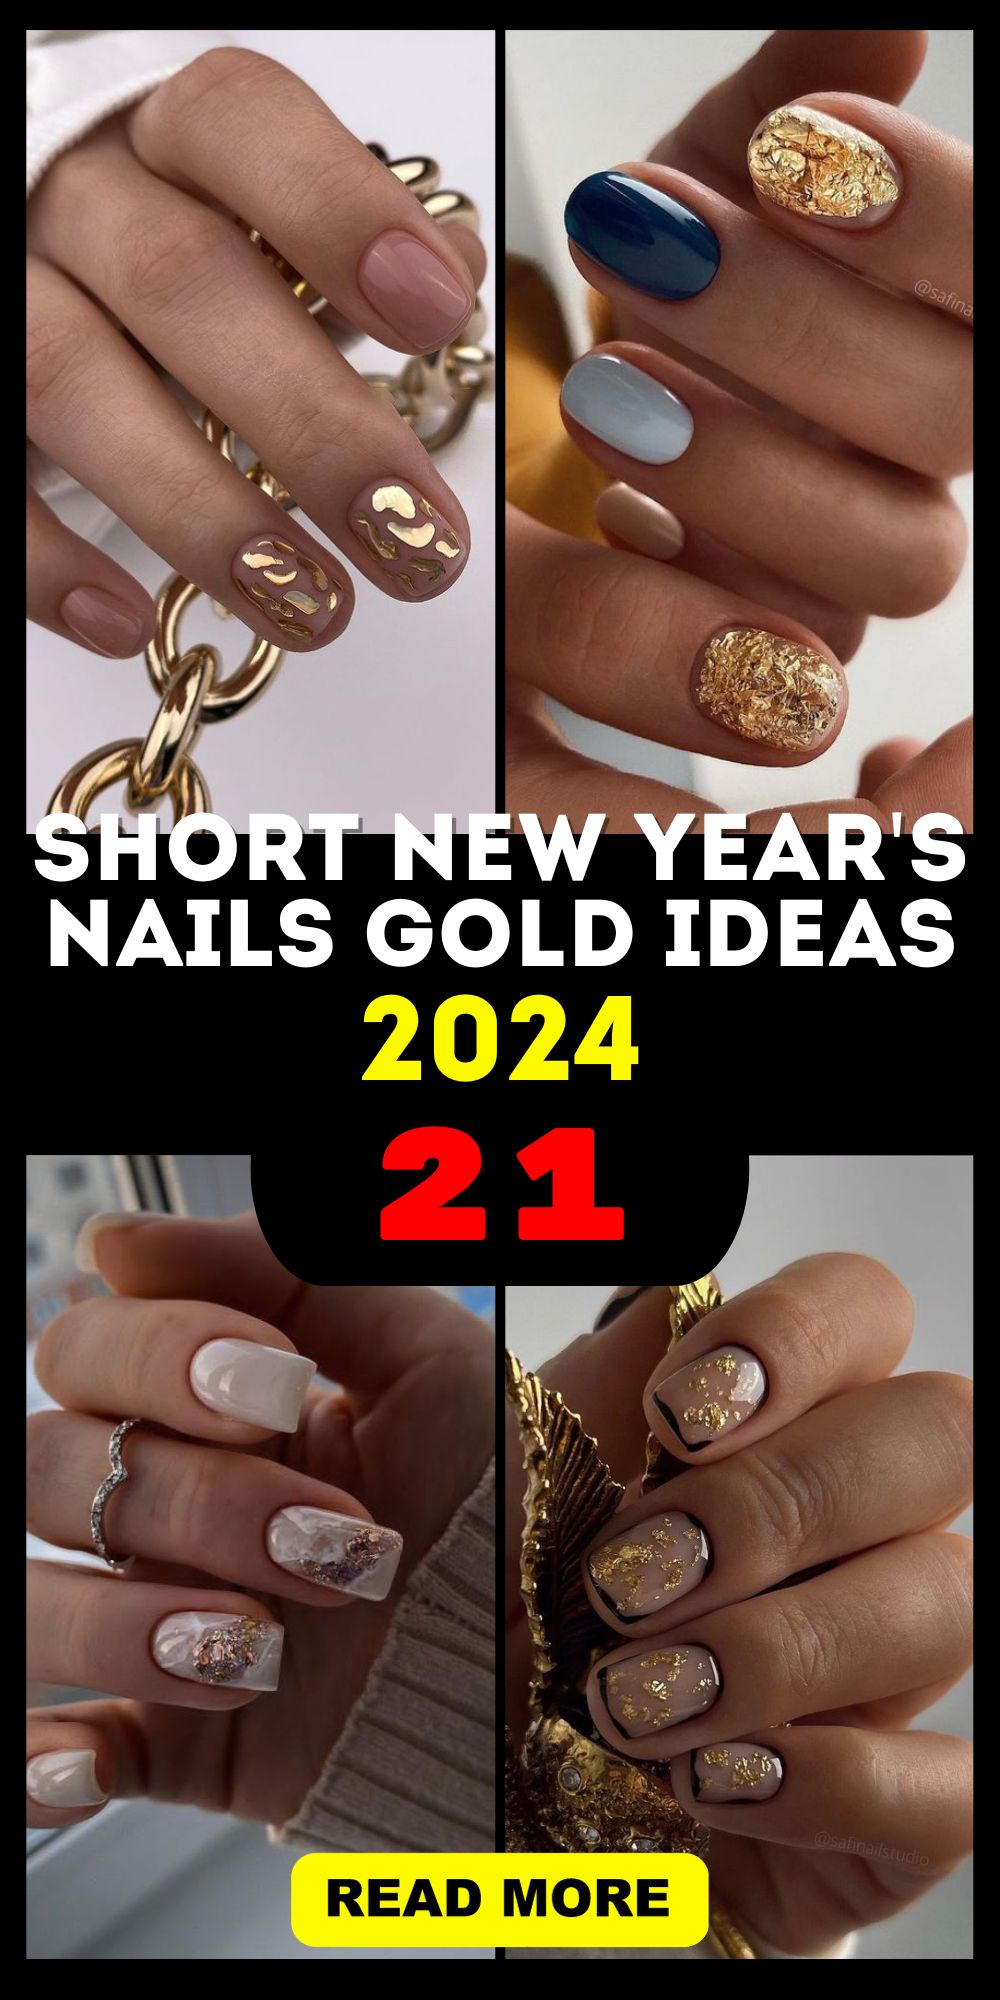 Trendy New Year's Nail Art 2024 - Elegant Gold Designs and Acrylic Trends